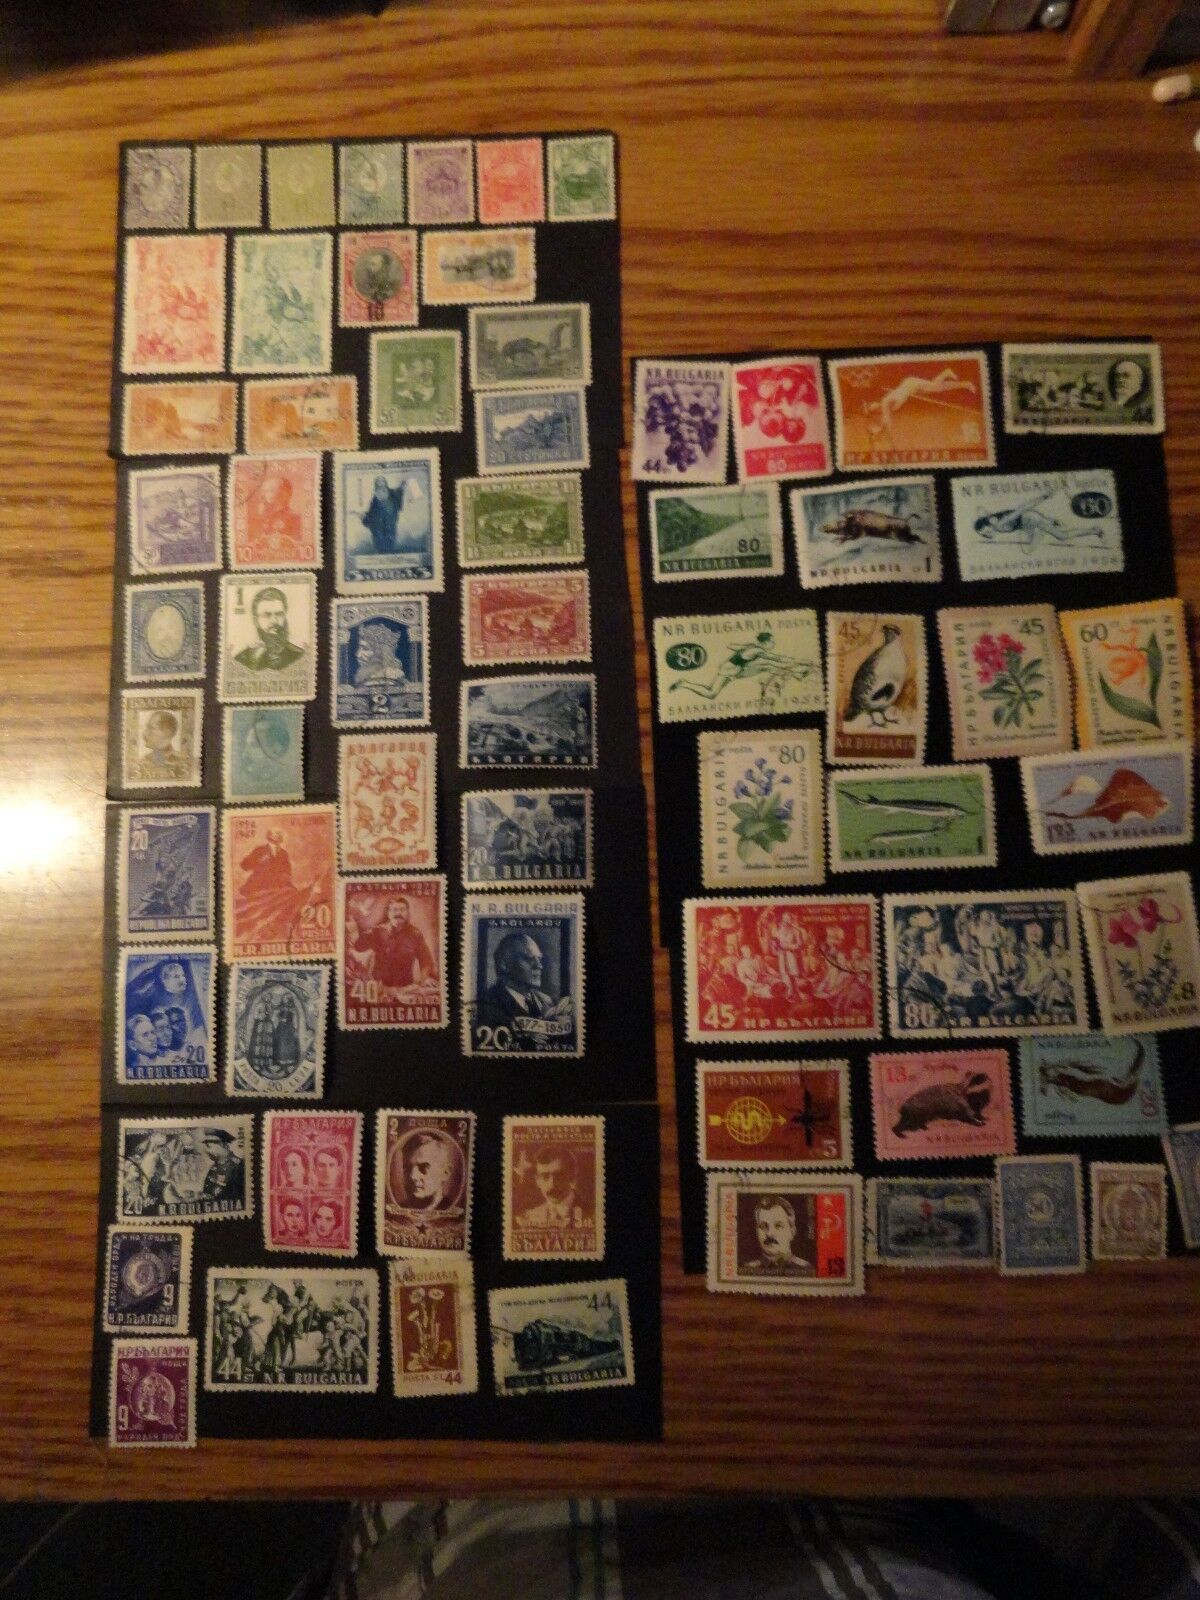 69 - DIFFERENT OLD VINTAGE STAMPS USED MINT Mail order HINGED BULGARIA Max 74% OFF